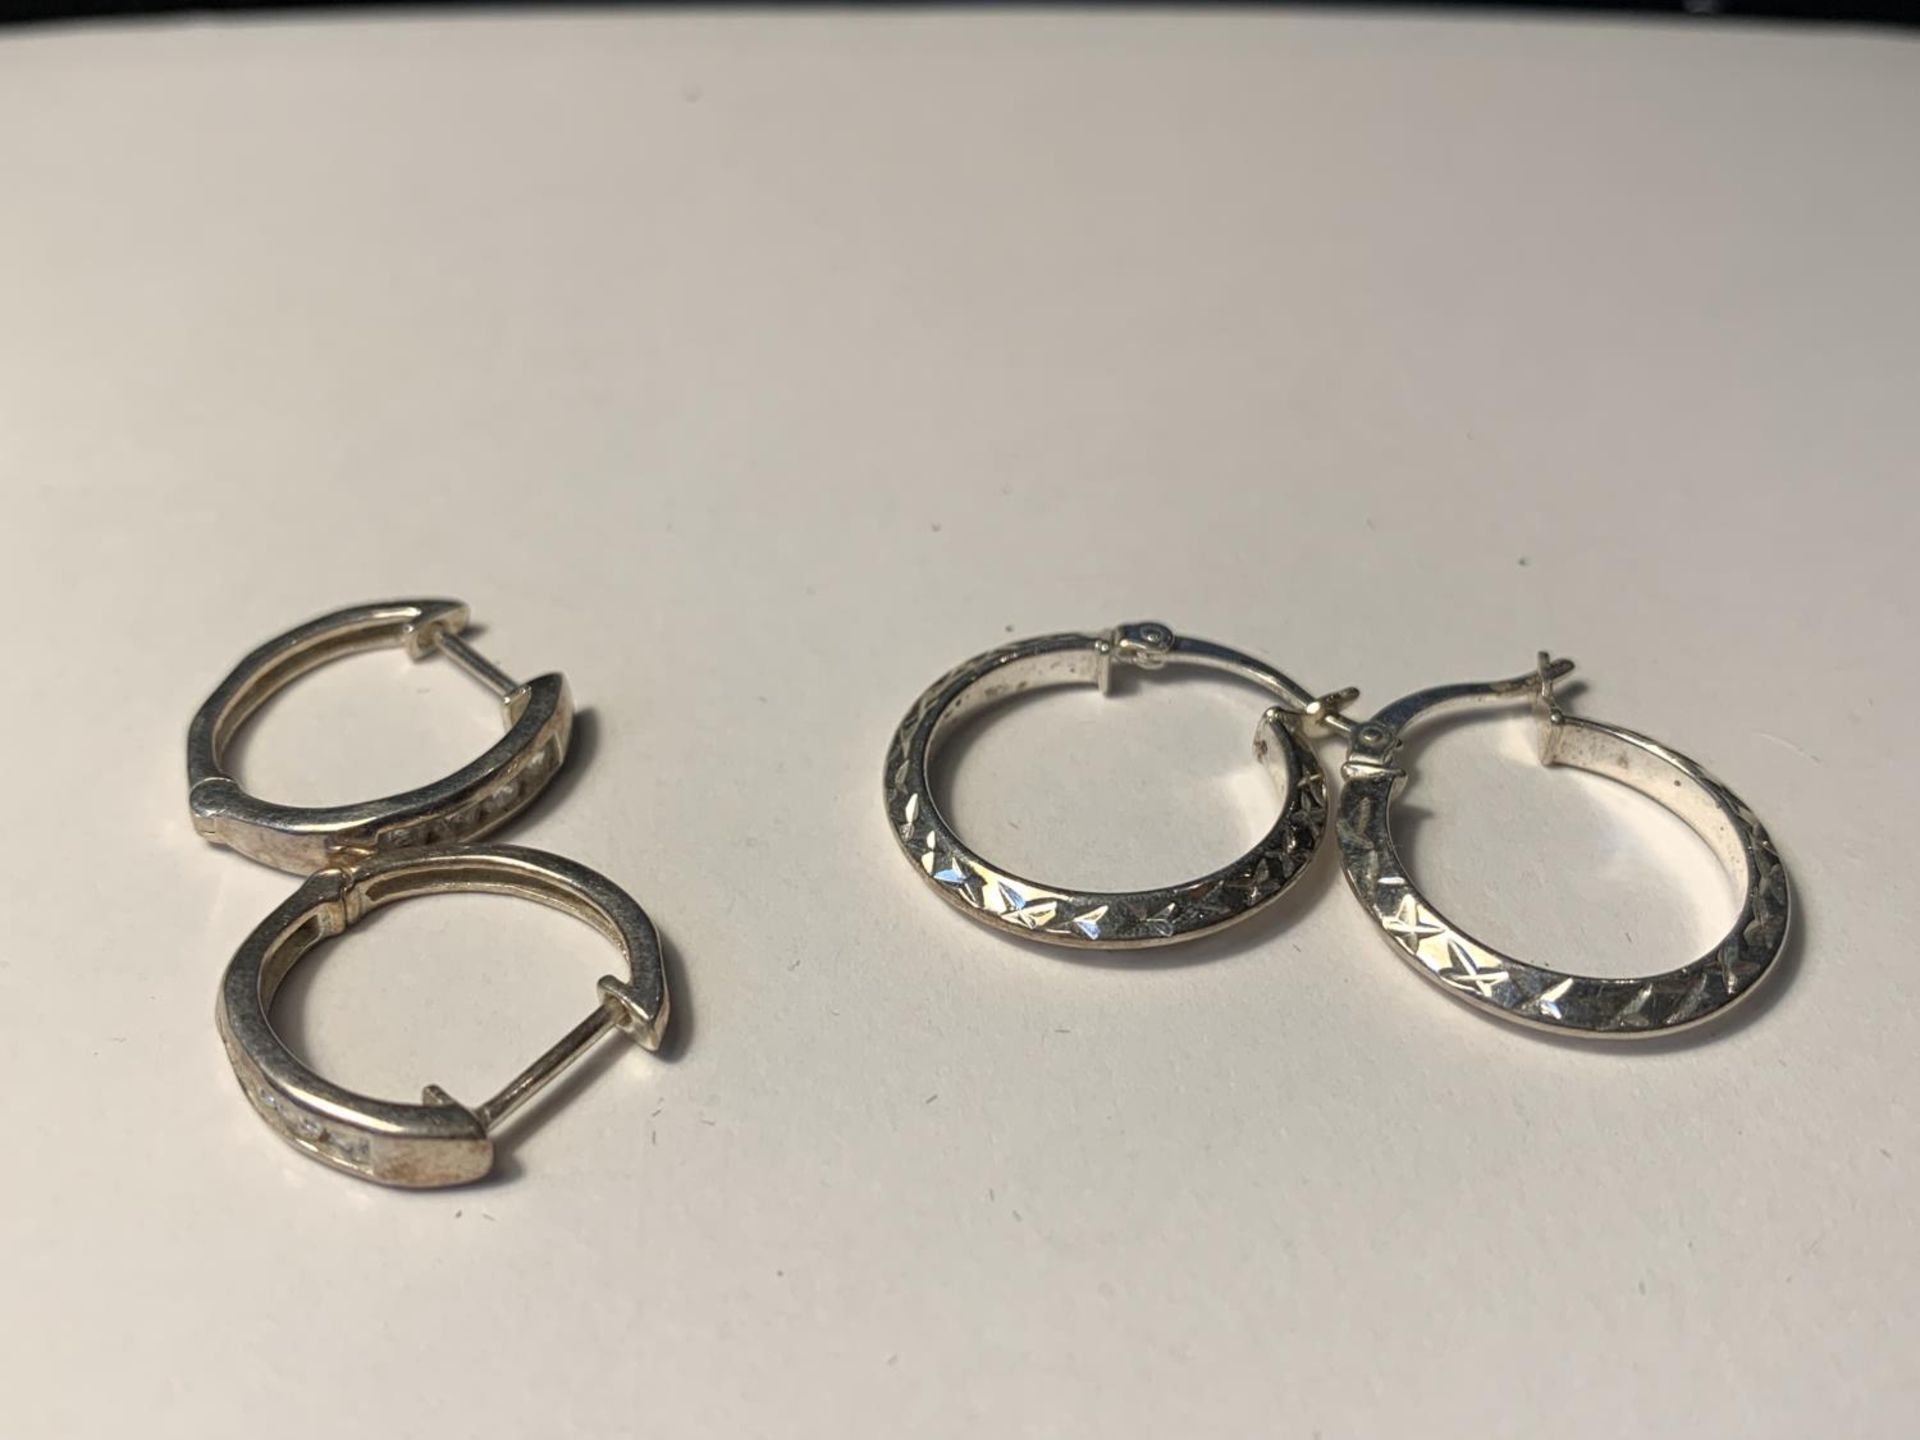 SEVEN PAIRS OF SILVER EARRINGS - Image 2 of 4